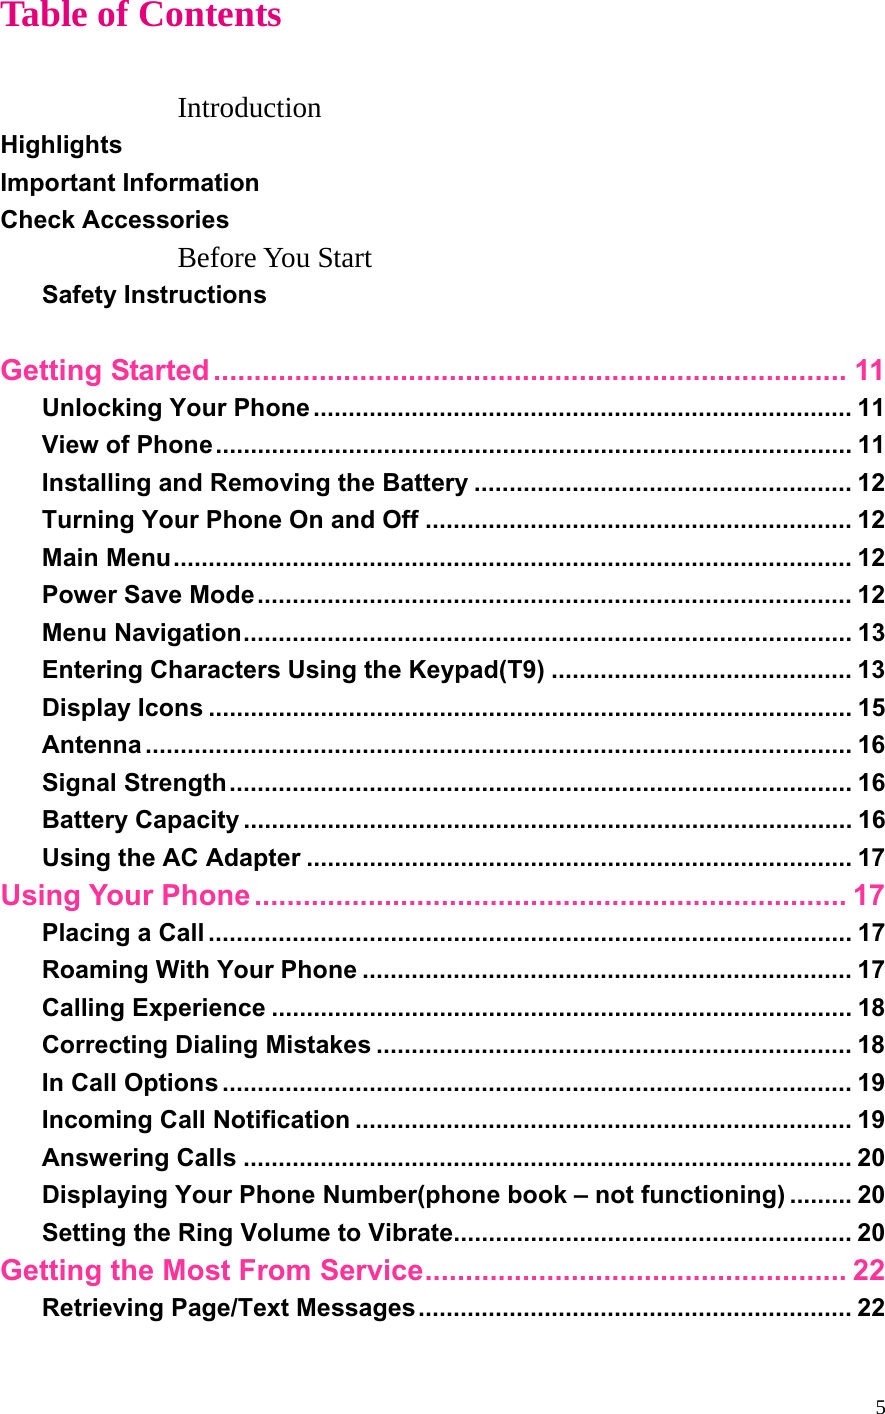 5 Table of Contents  Introduction Highlights Important Information Check Accessories Before You Start Safety Instructions  Getting Started.............................................................................. 11 Unlocking Your Phone ............................................................................. 11 View of Phone........................................................................................... 11 Installing and Removing the Battery ...................................................... 12 Turning Your Phone On and Off ............................................................. 12 Main Menu................................................................................................. 12 Power Save Mode..................................................................................... 12 Menu Navigation....................................................................................... 13 Entering Characters Using the Keypad(T9) ........................................... 13 Display Icons ............................................................................................ 15 Antenna ..................................................................................................... 16 Signal Strength......................................................................................... 16 Battery Capacity ....................................................................................... 16 Using the AC Adapter .............................................................................. 17 Using Your Phone ......................................................................... 17 Placing a Call ............................................................................................ 17 Roaming With Your Phone ...................................................................... 17 Calling Experience ................................................................................... 18 Correcting Dialing Mistakes .................................................................... 18 In Call Options .......................................................................................... 19 Incoming Call Notification ....................................................................... 19 Answering Calls ....................................................................................... 20 Displaying Your Phone Number(phone book – not functioning) ......... 20 Setting the Ring Volume to Vibrate......................................................... 20 Getting the Most From Service.................................................... 22 Retrieving Page/Text Messages.............................................................. 22 